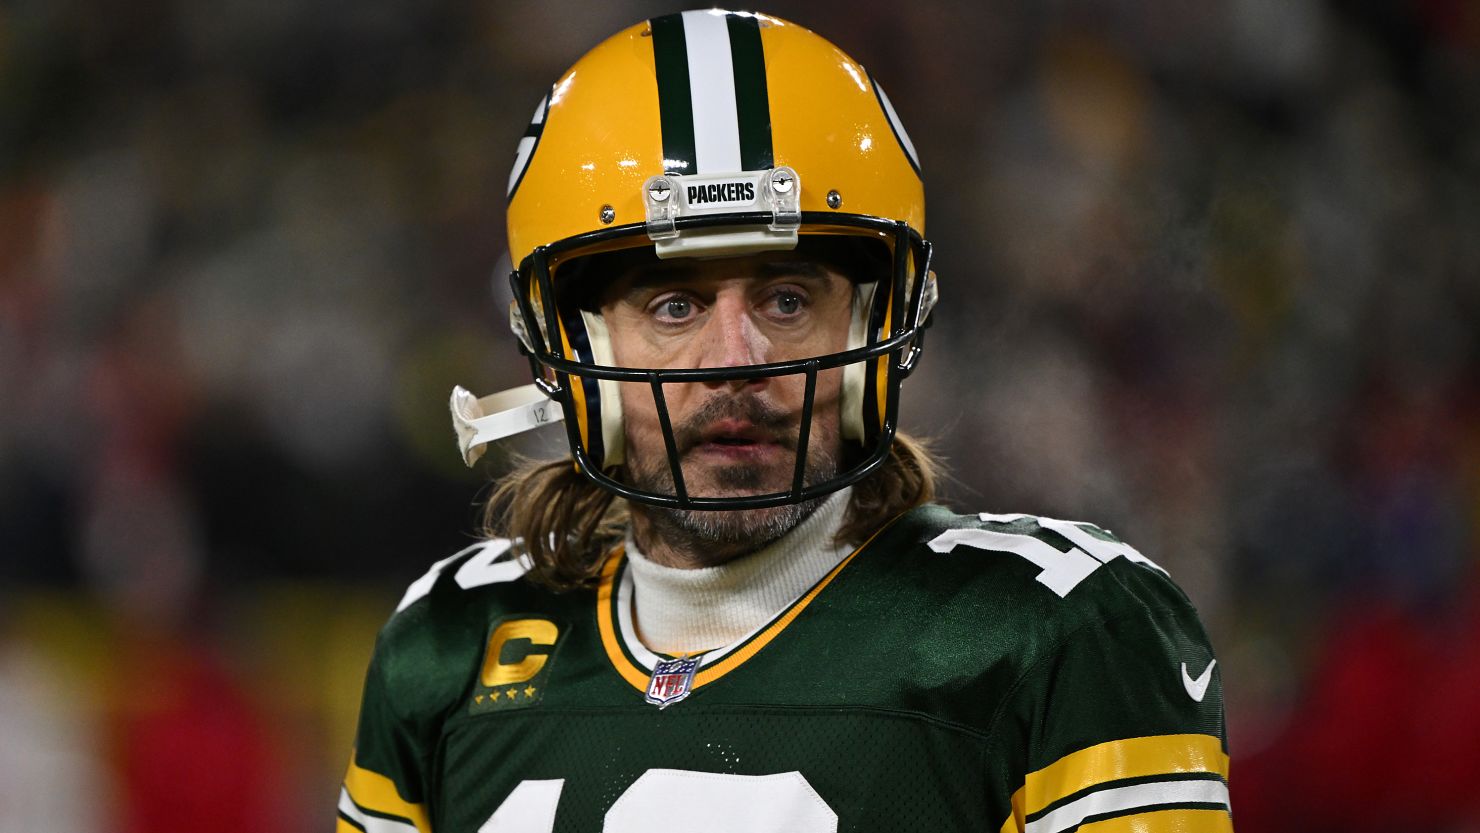 Aaron Rodgers reached a deal with the Packers a month after winning the MVP.